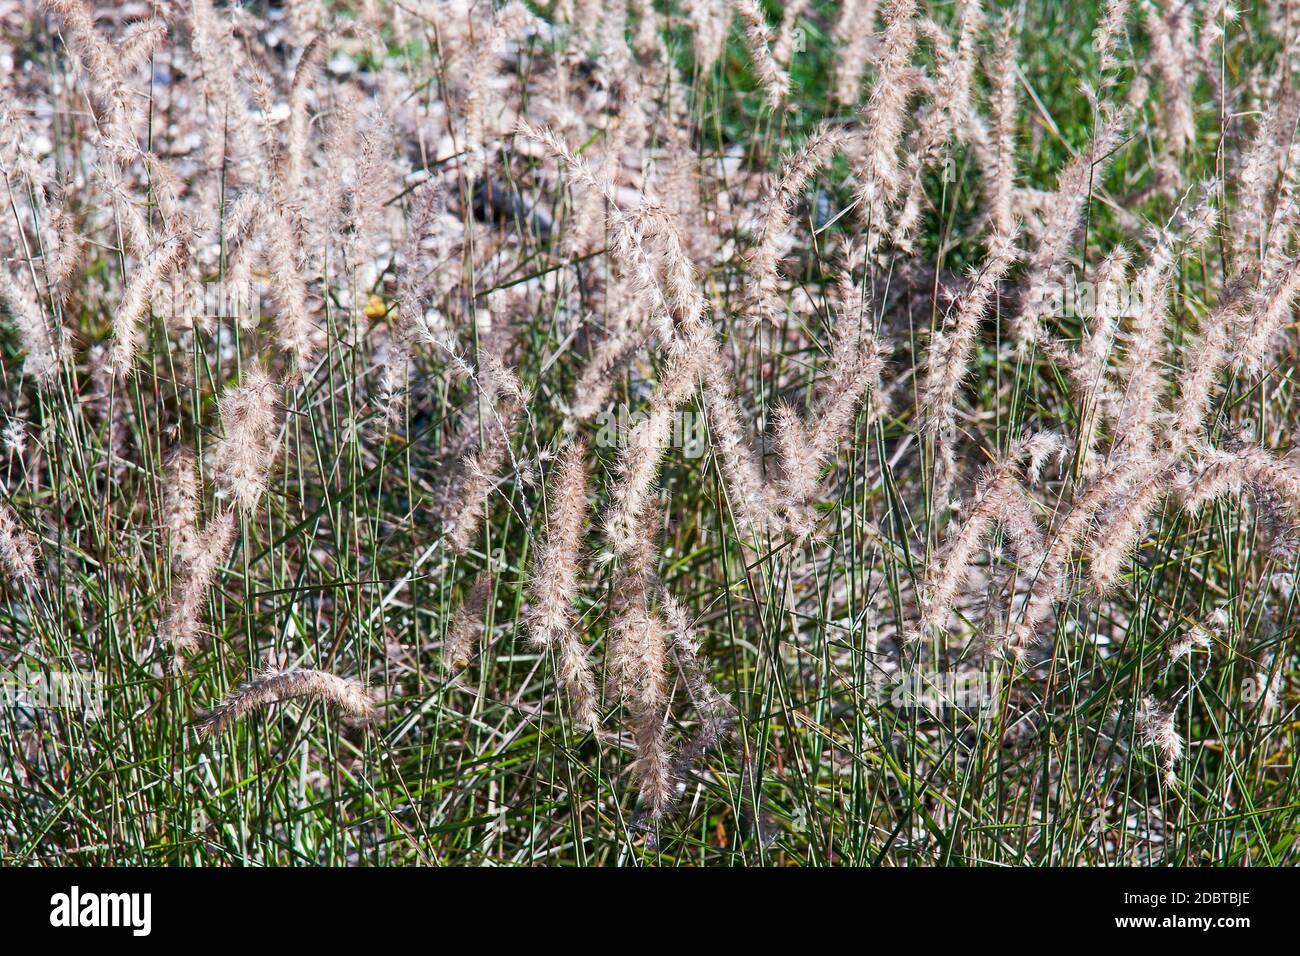 Pennisetum Orientale High Resolution Stock Photography and Images - Alamy